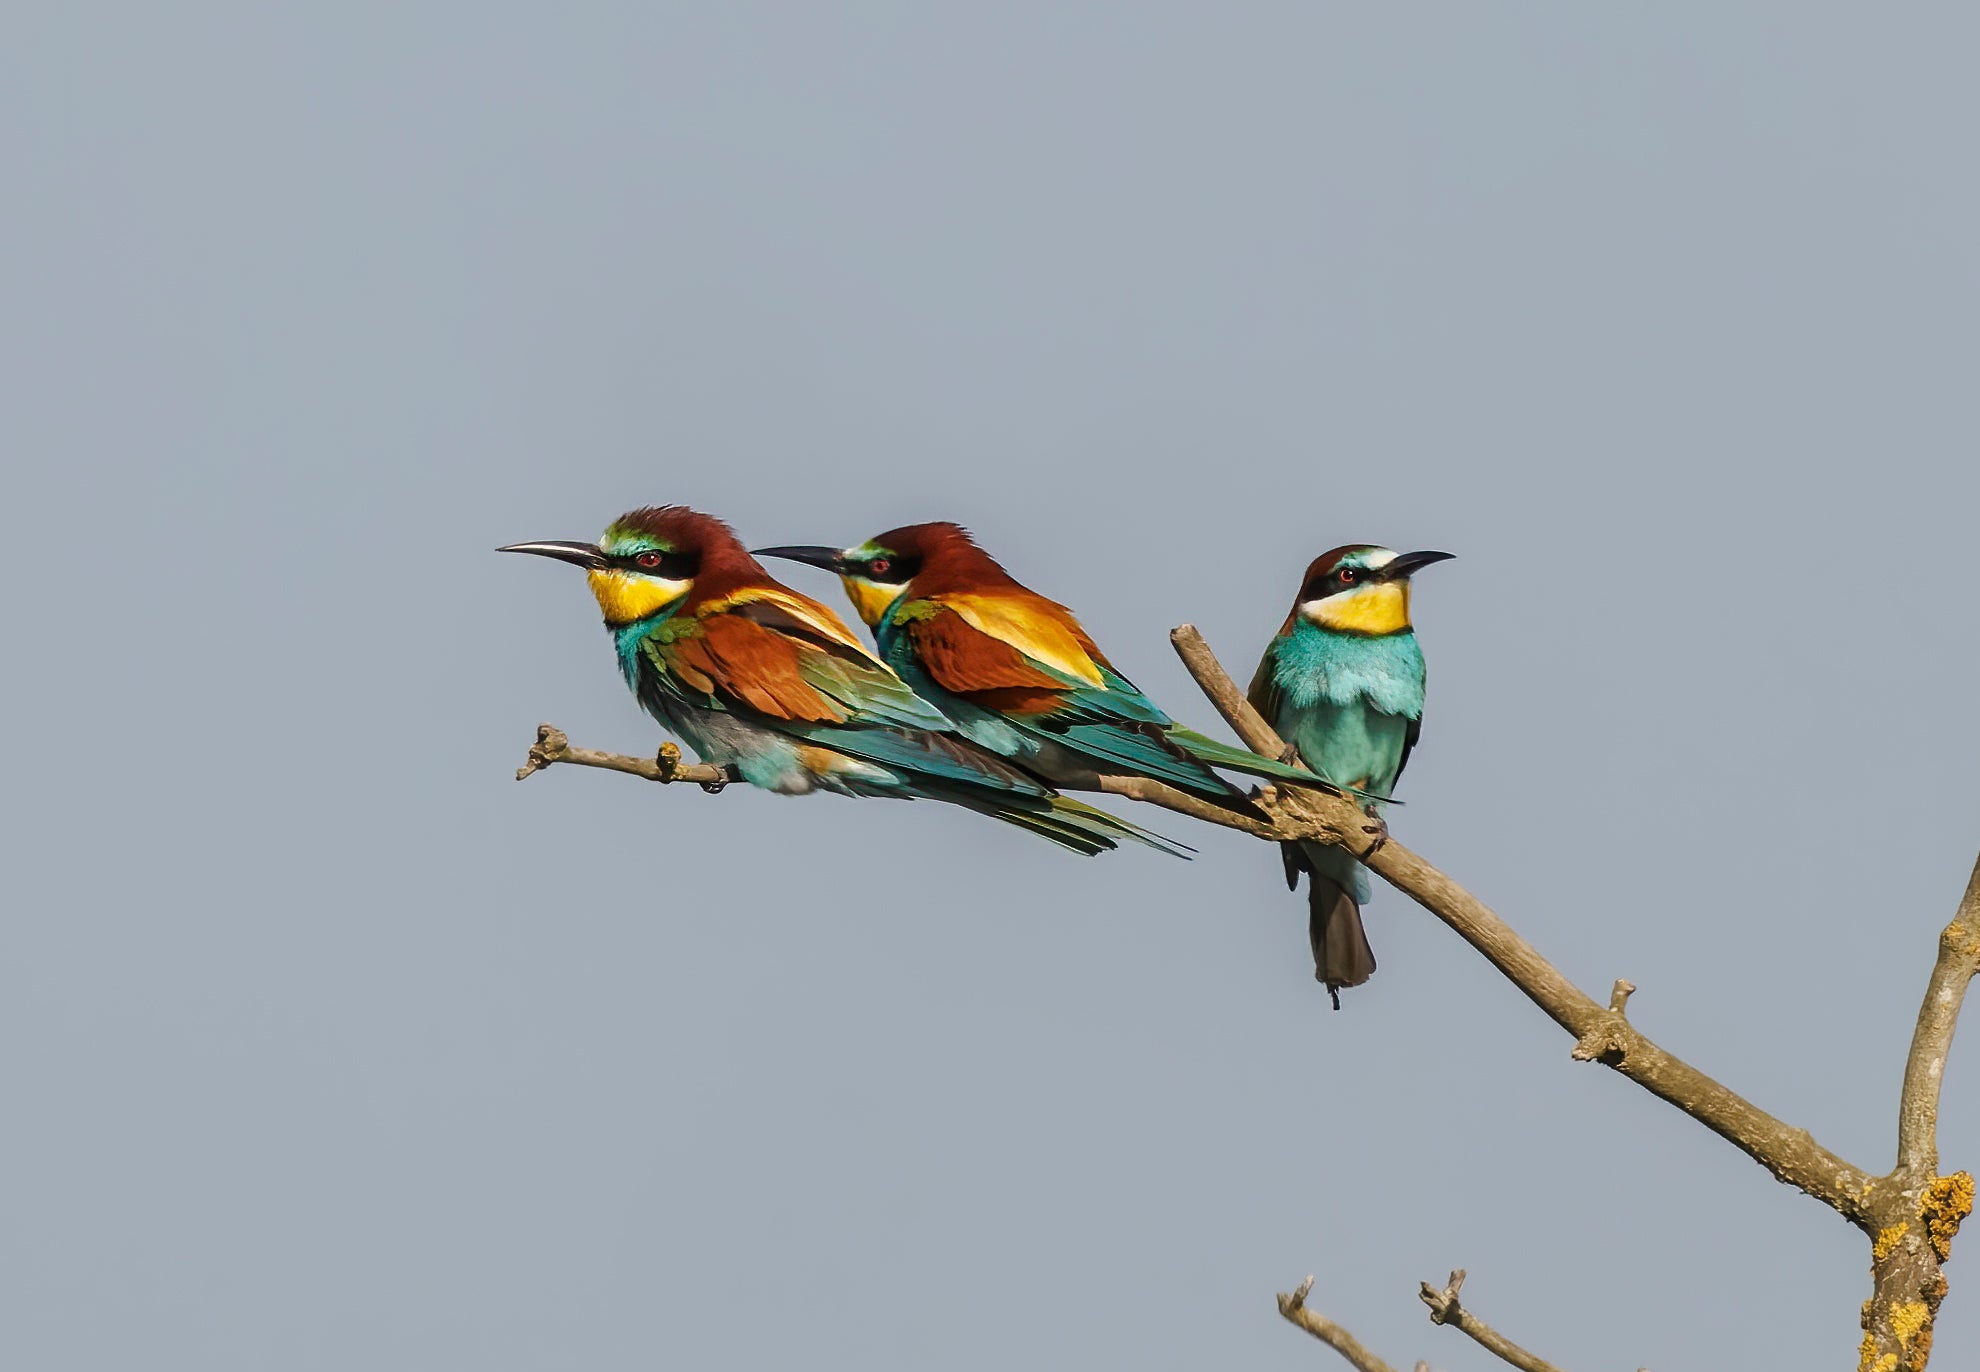 Three rare bee-eaters on a branch (Mike Edgecombe/PA)